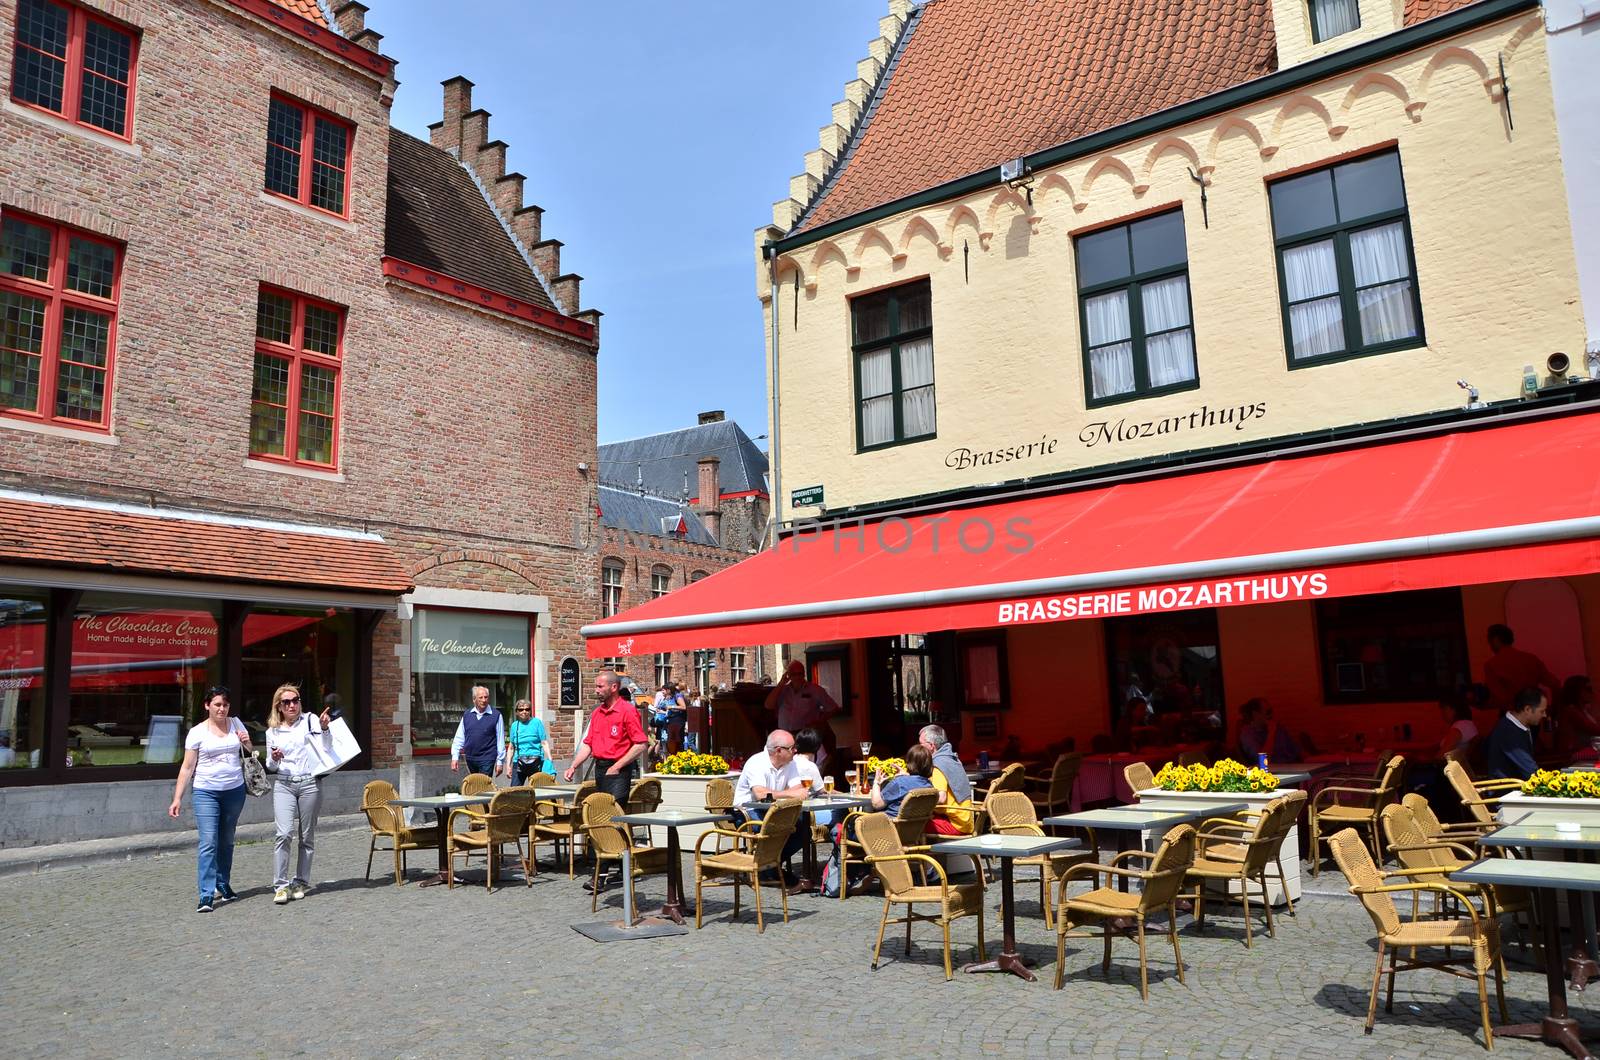 Bruges, Belgium - May 11, 2015: Tourist at outdoor cafe in Bruges, Belgium. Bruges is the capital and largest city of the province of West Flanders in the Flemish Region of Belgium. 